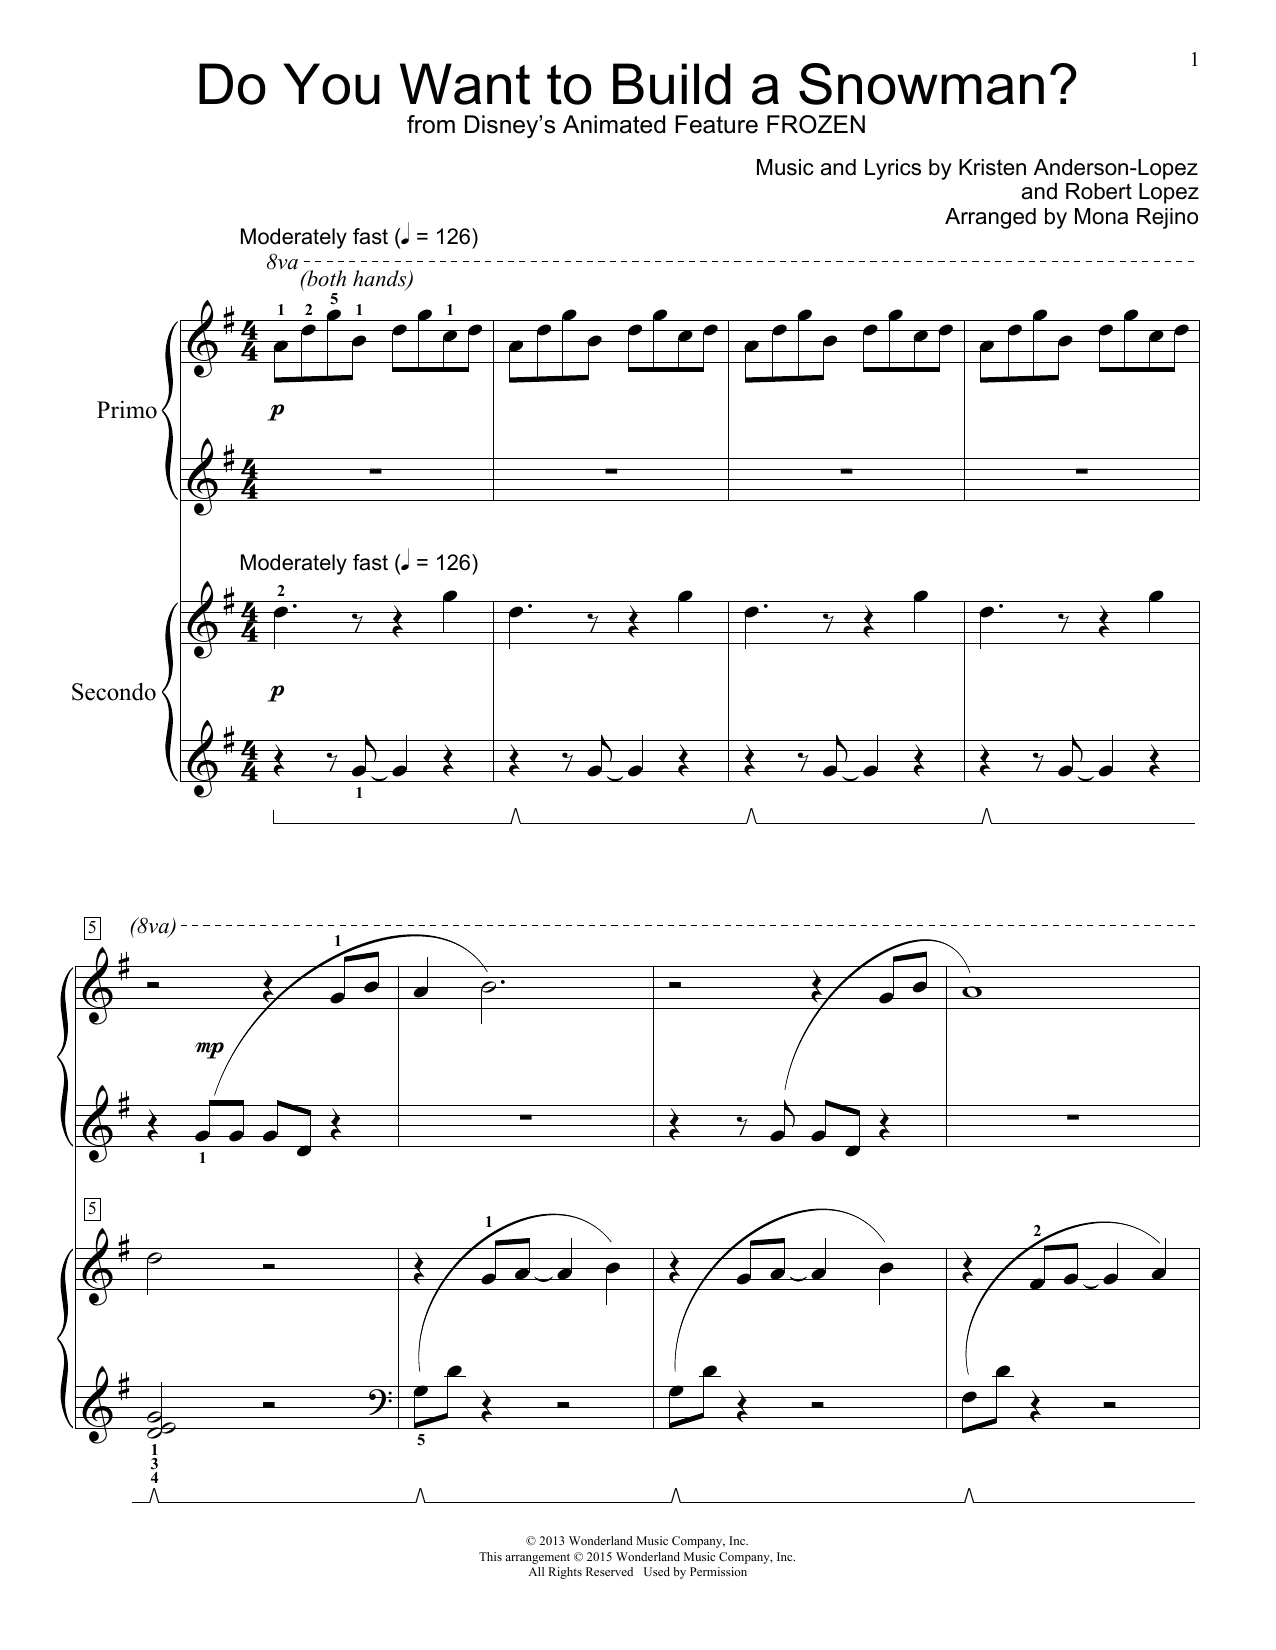 Want to Build a Snowman Sheet Music and Piano Tutorial